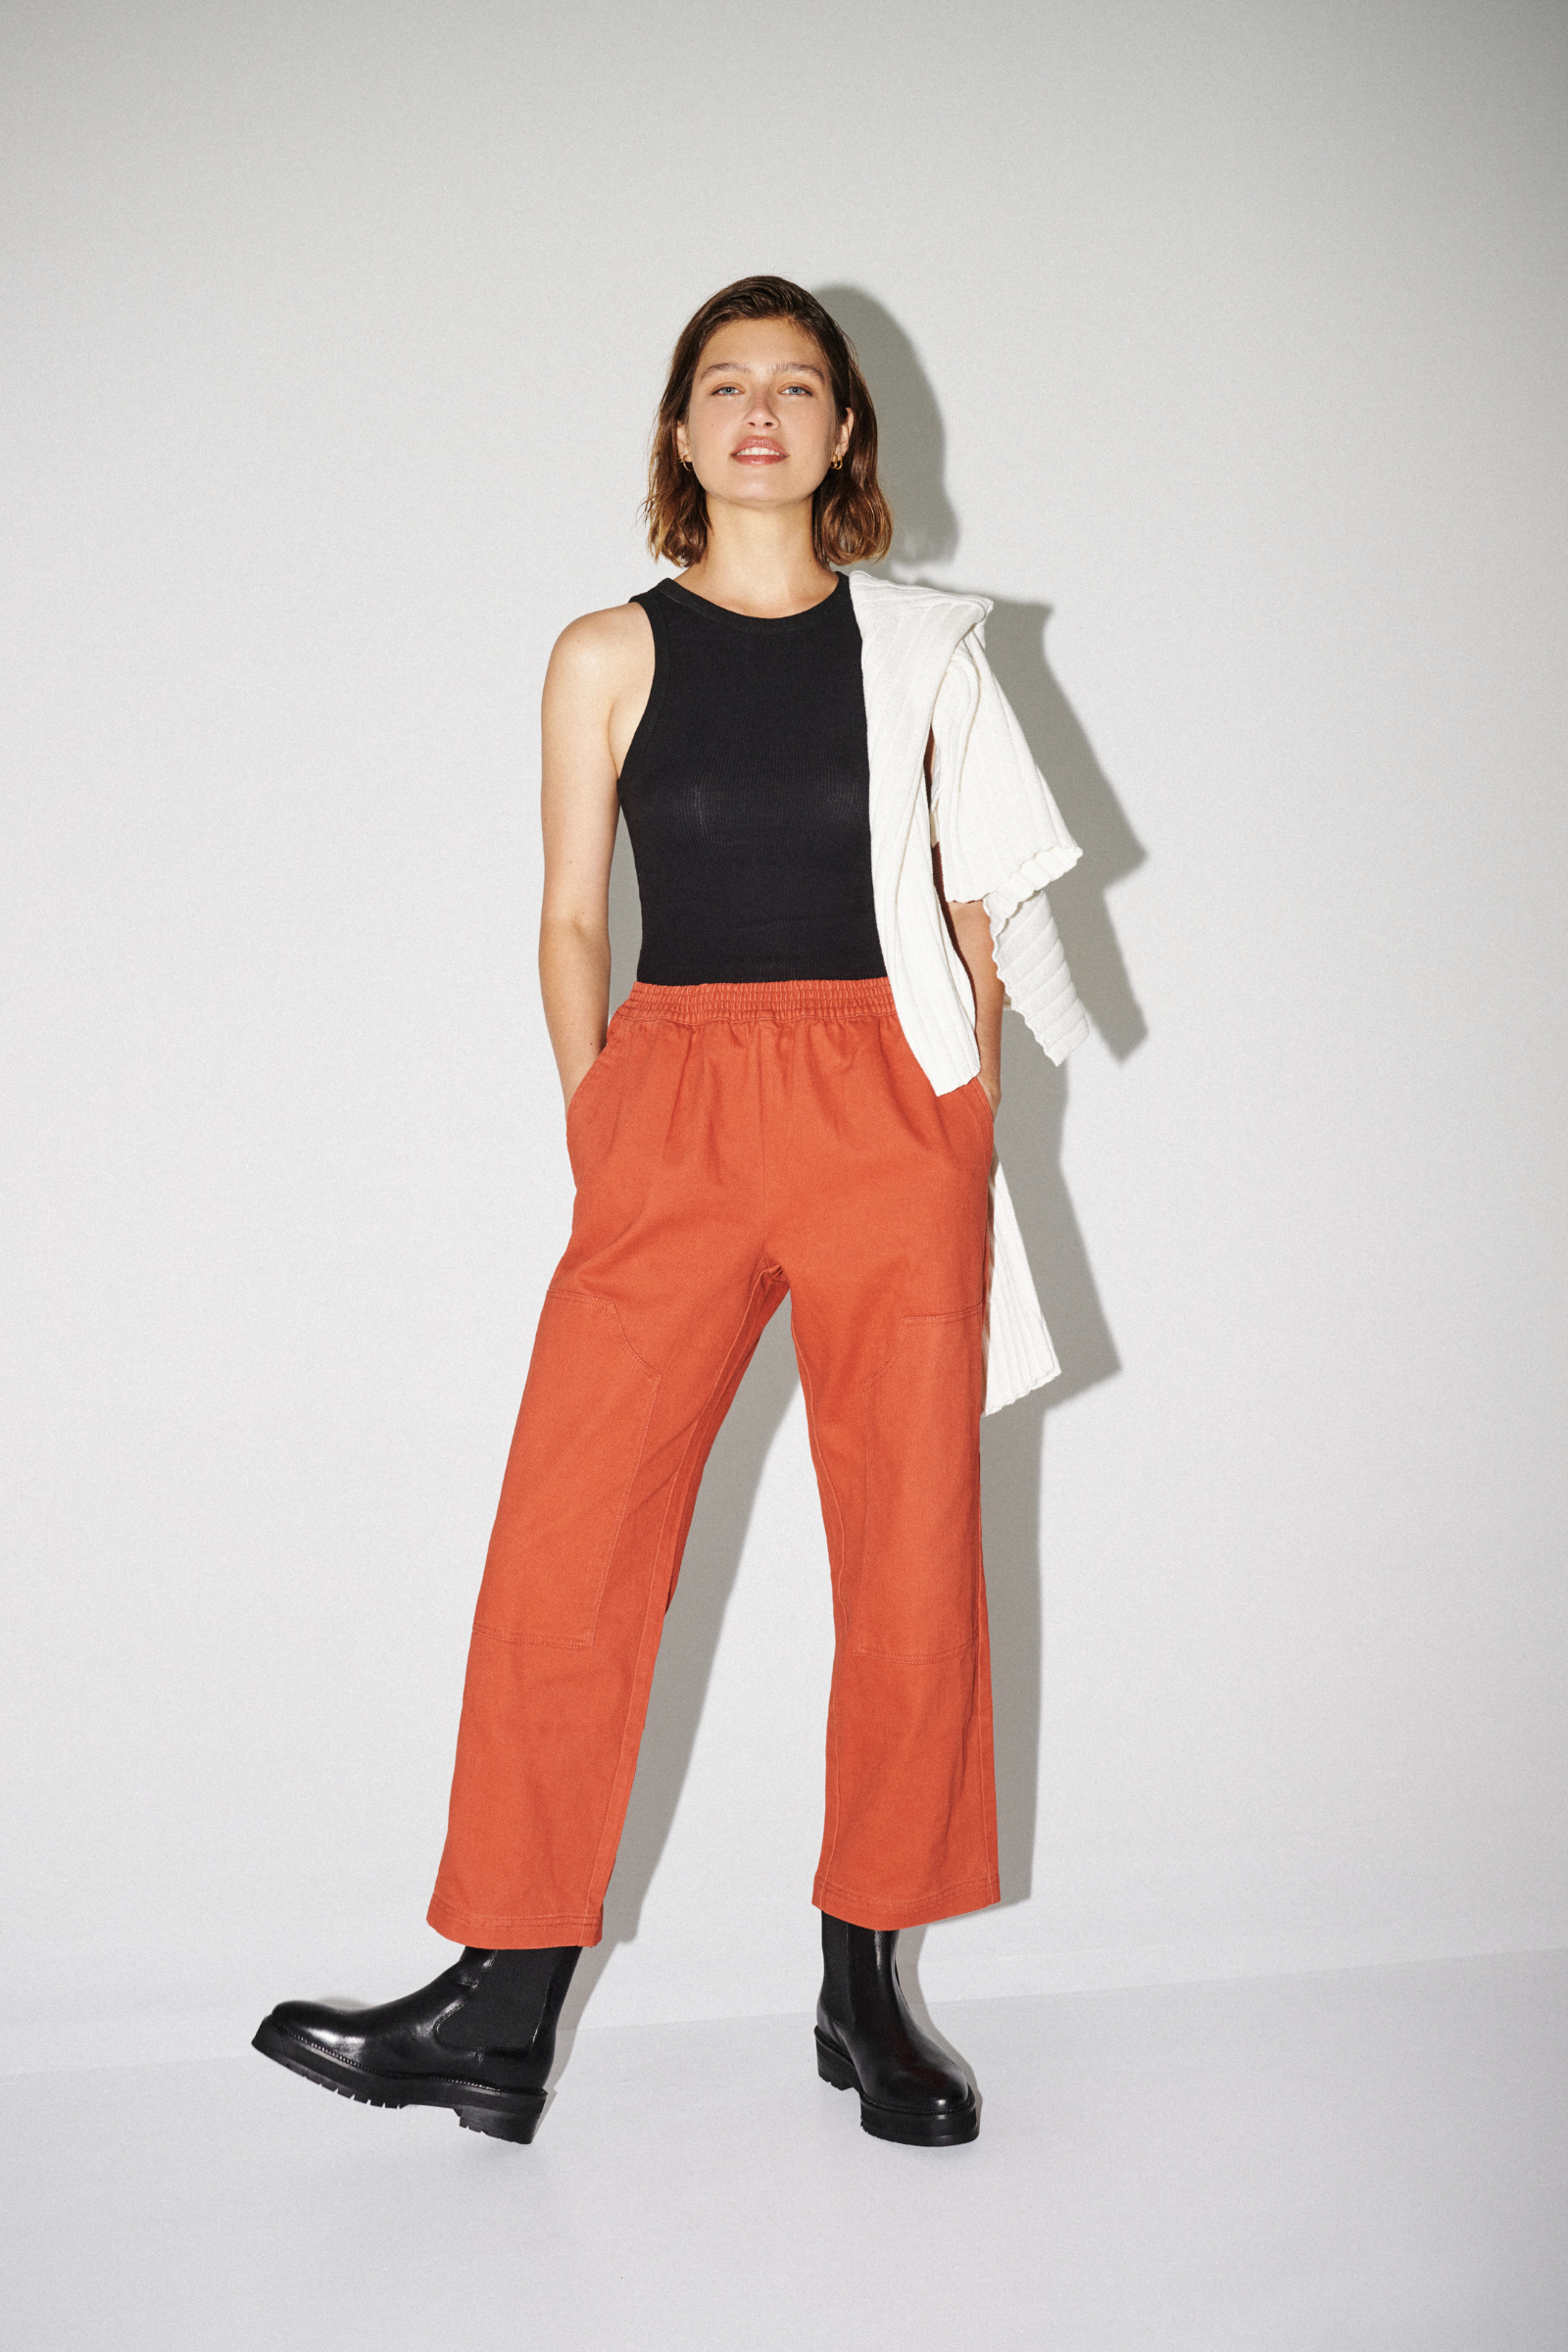 Nude Lucy Margo Utility Pant in Sienna